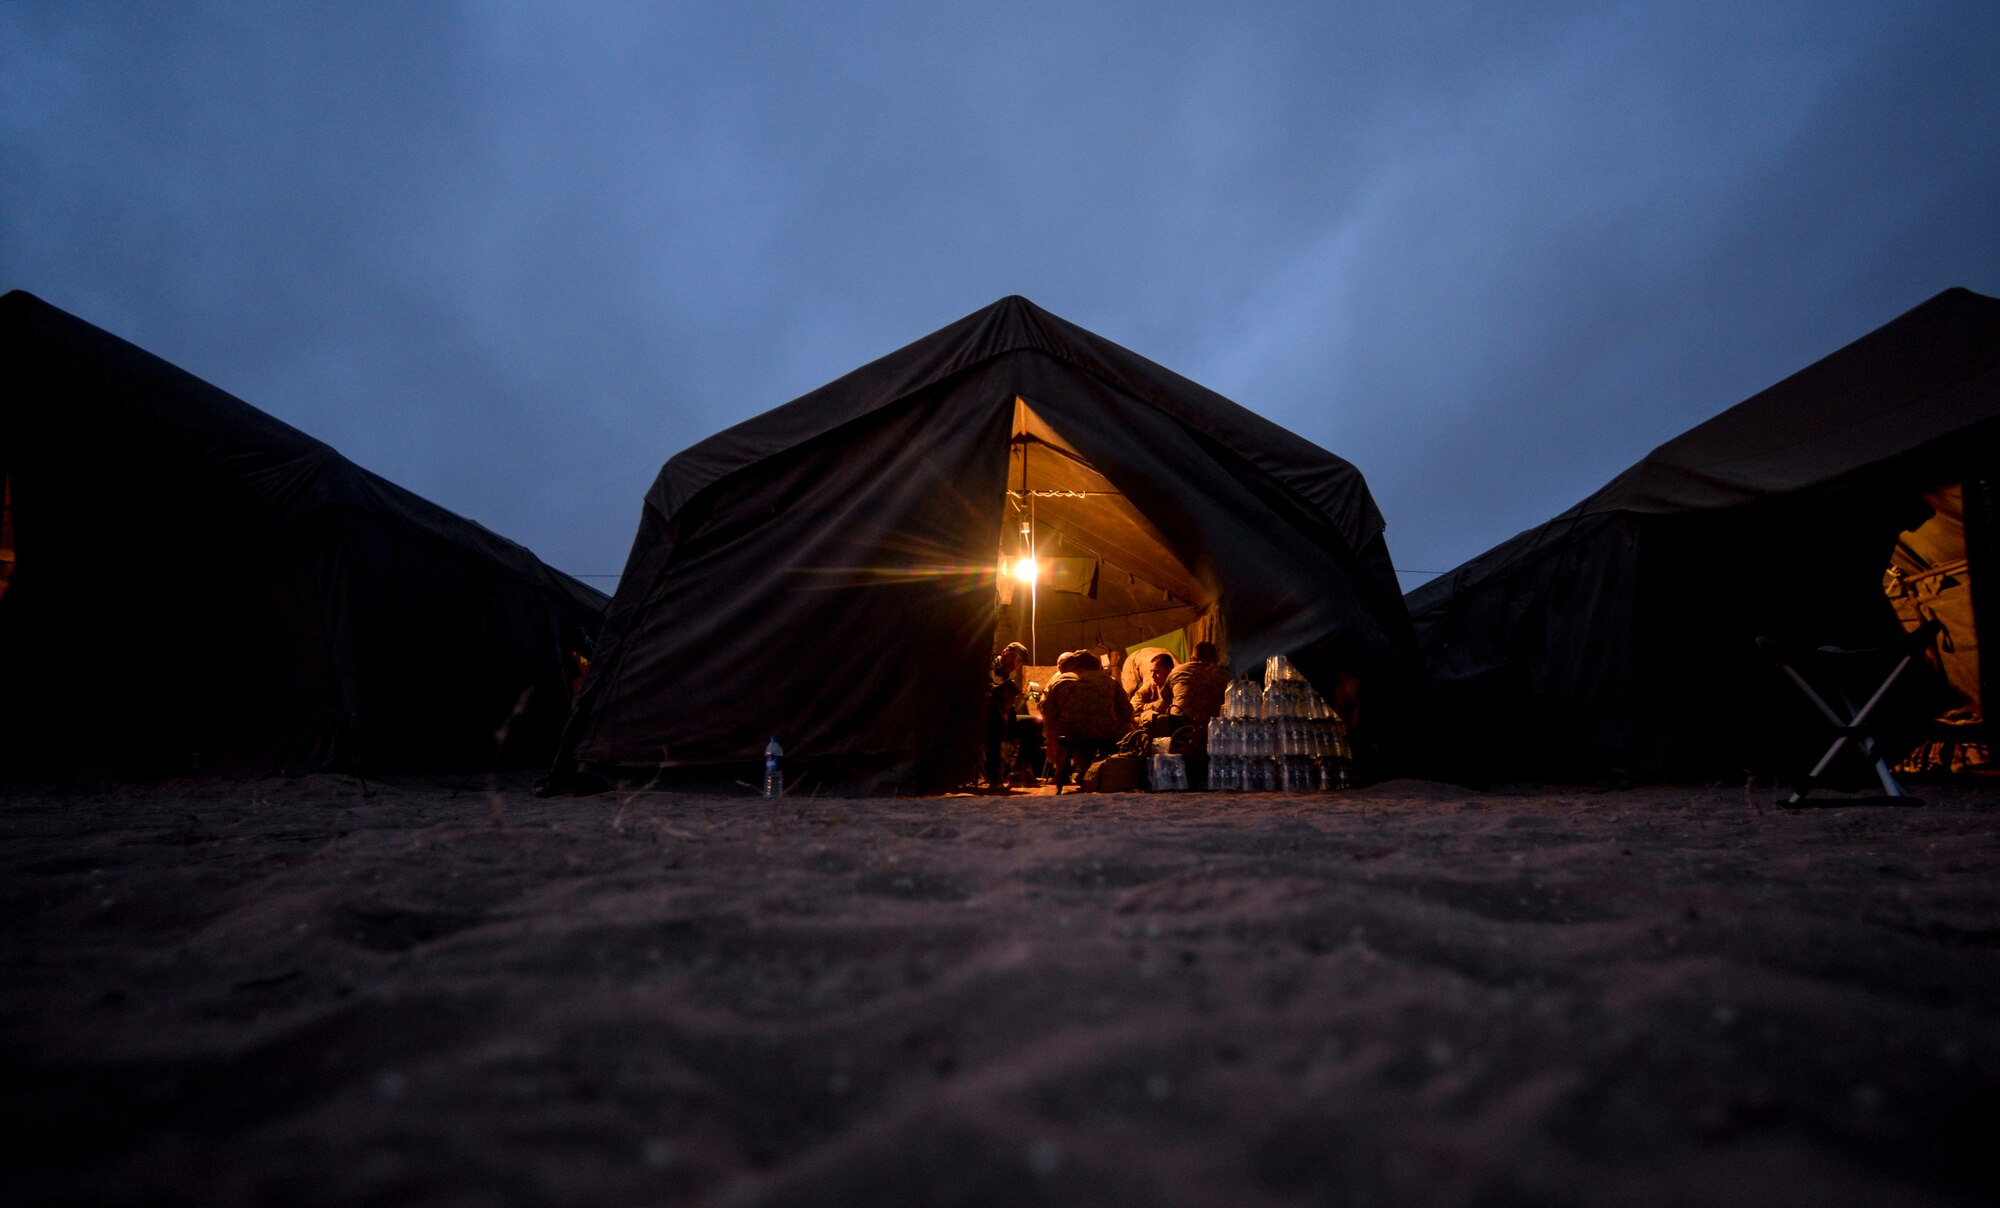 Military members participating in AFRICAN LION 16 gather inside of their tents at the end of the day at Tifnit, Kingdom of Morocco, April 23, 2016. Of the 11 nations participating in the annual exercise, a group of U.S. military members, Royal Moroccan armed forces members, Spanish Legion soldiers and Royal Netherlands army soldiers lived in field conditions and participated in daily familiarization with other nations’ tactics to improve interoperability. (U.S. Air Force photo by Senior Airman Krystal Ardrey/Released)